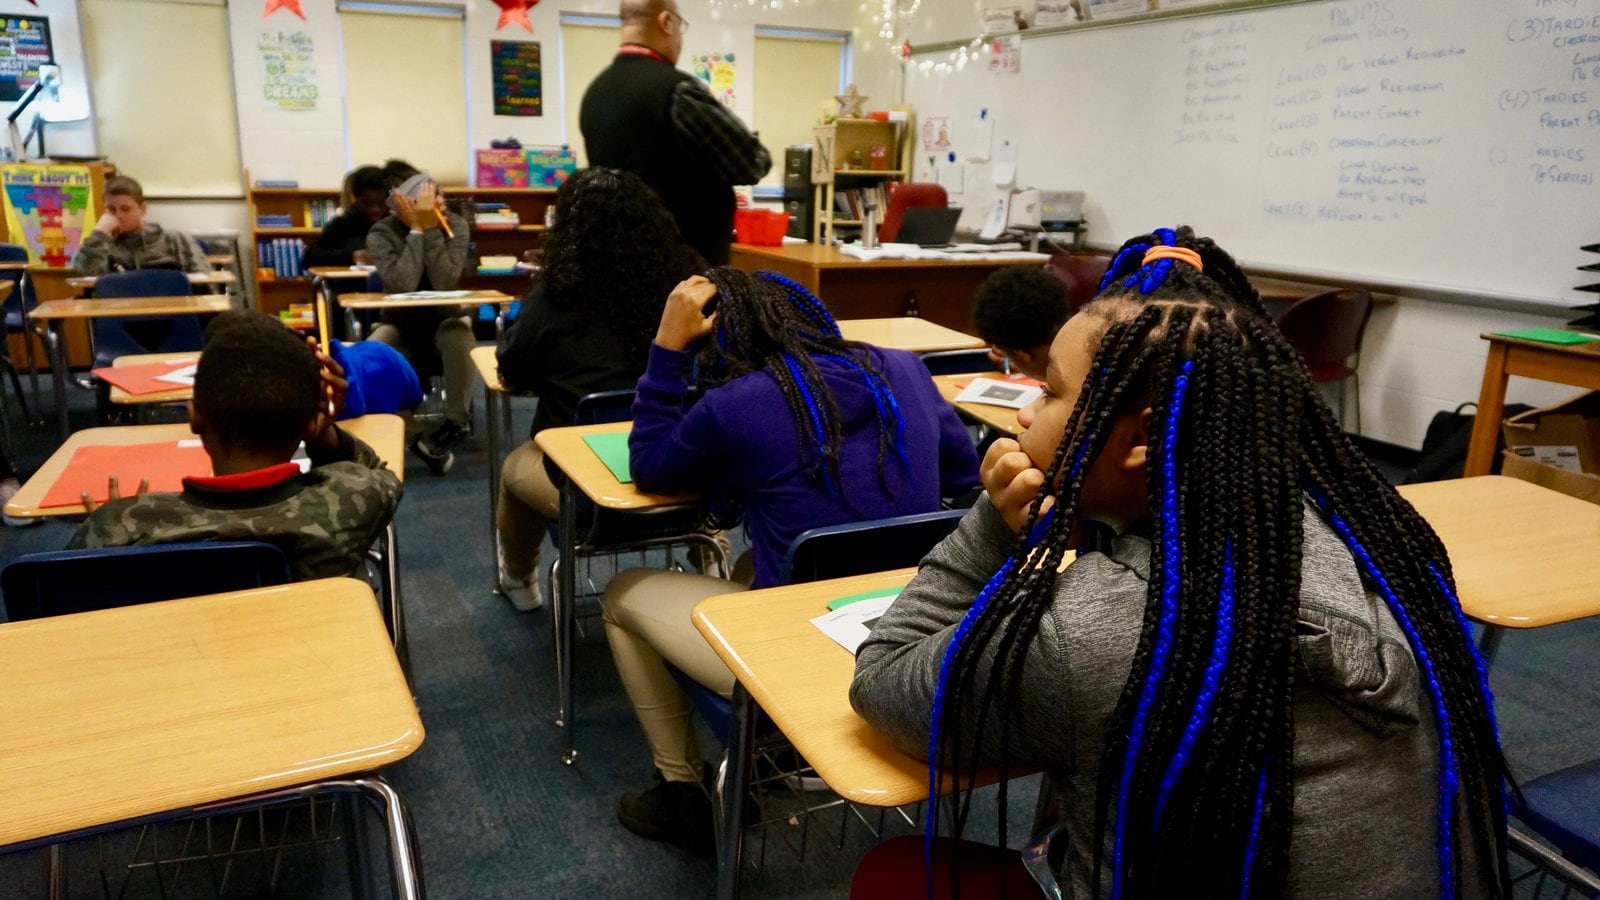 Three students in the foreground sit at desks in a classroom with their backs to the camera. A teacher walks through a line of desks in the background.